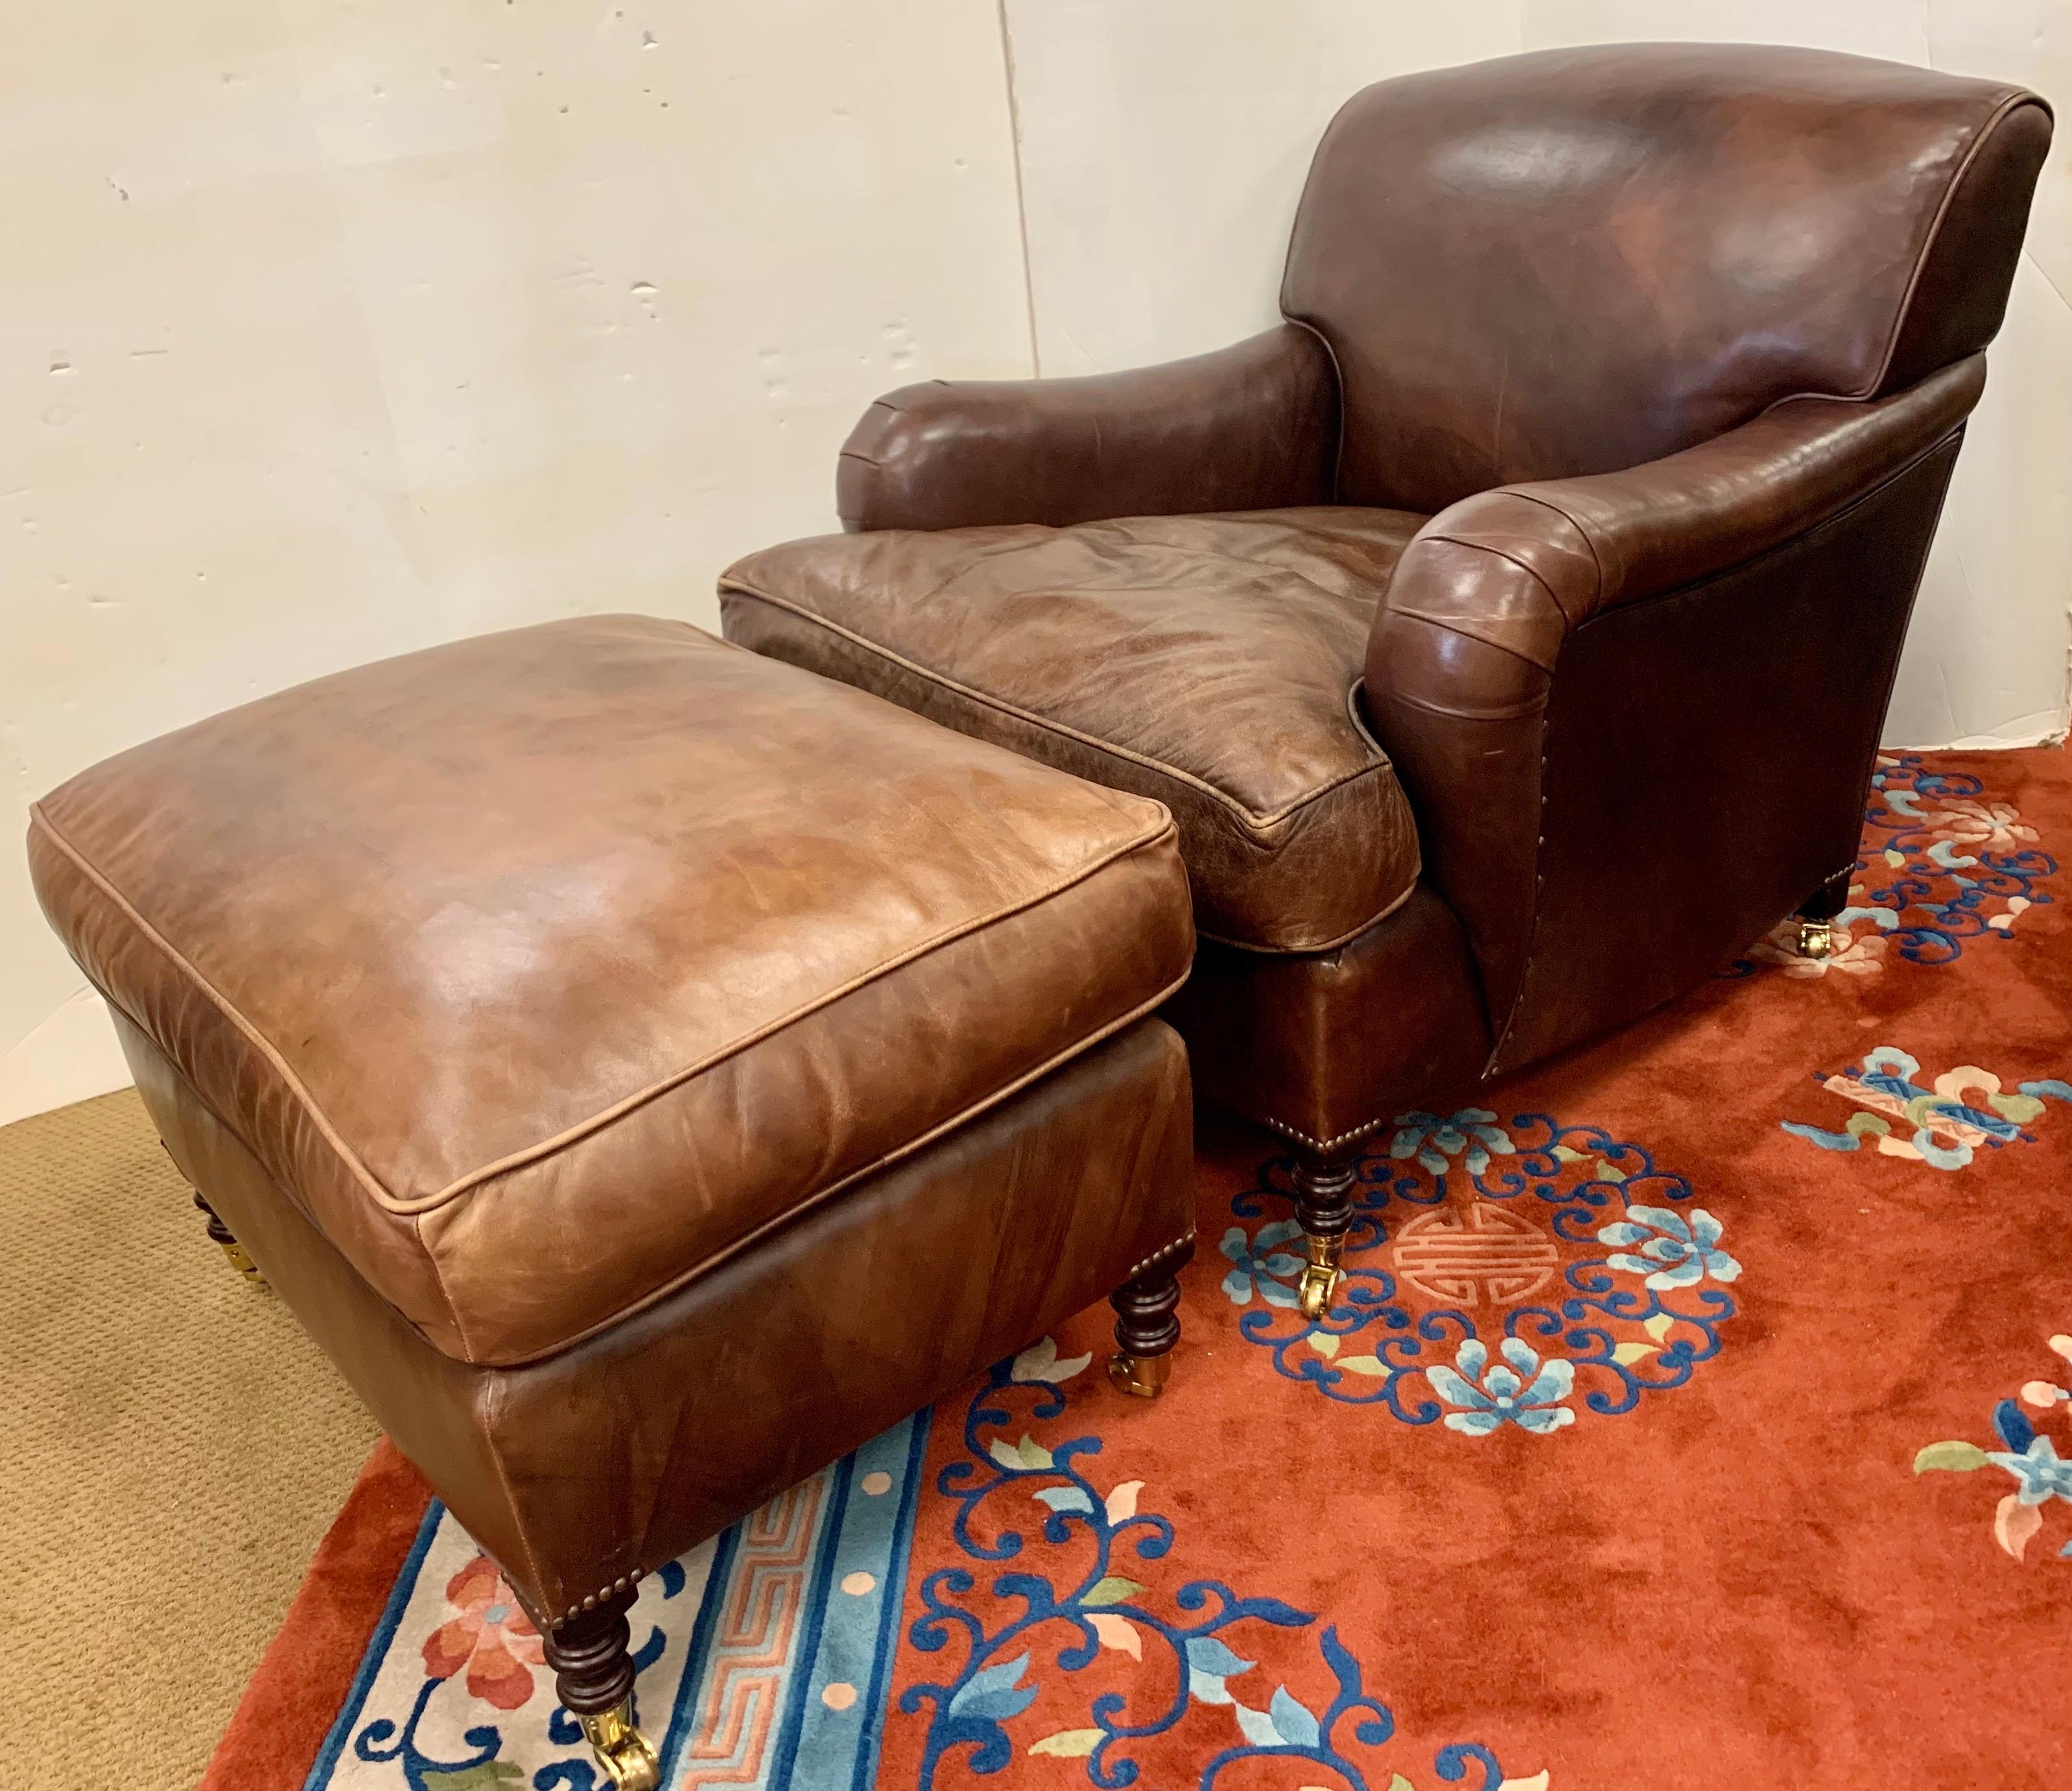 Rare to see a signed George Smith leather armchair accompanied by the matching ottoman. All tags attached. Features down-filled cushions, scrolled arms, brass nailheads and brass castors. George Smith makes some of the finest armchairs available.